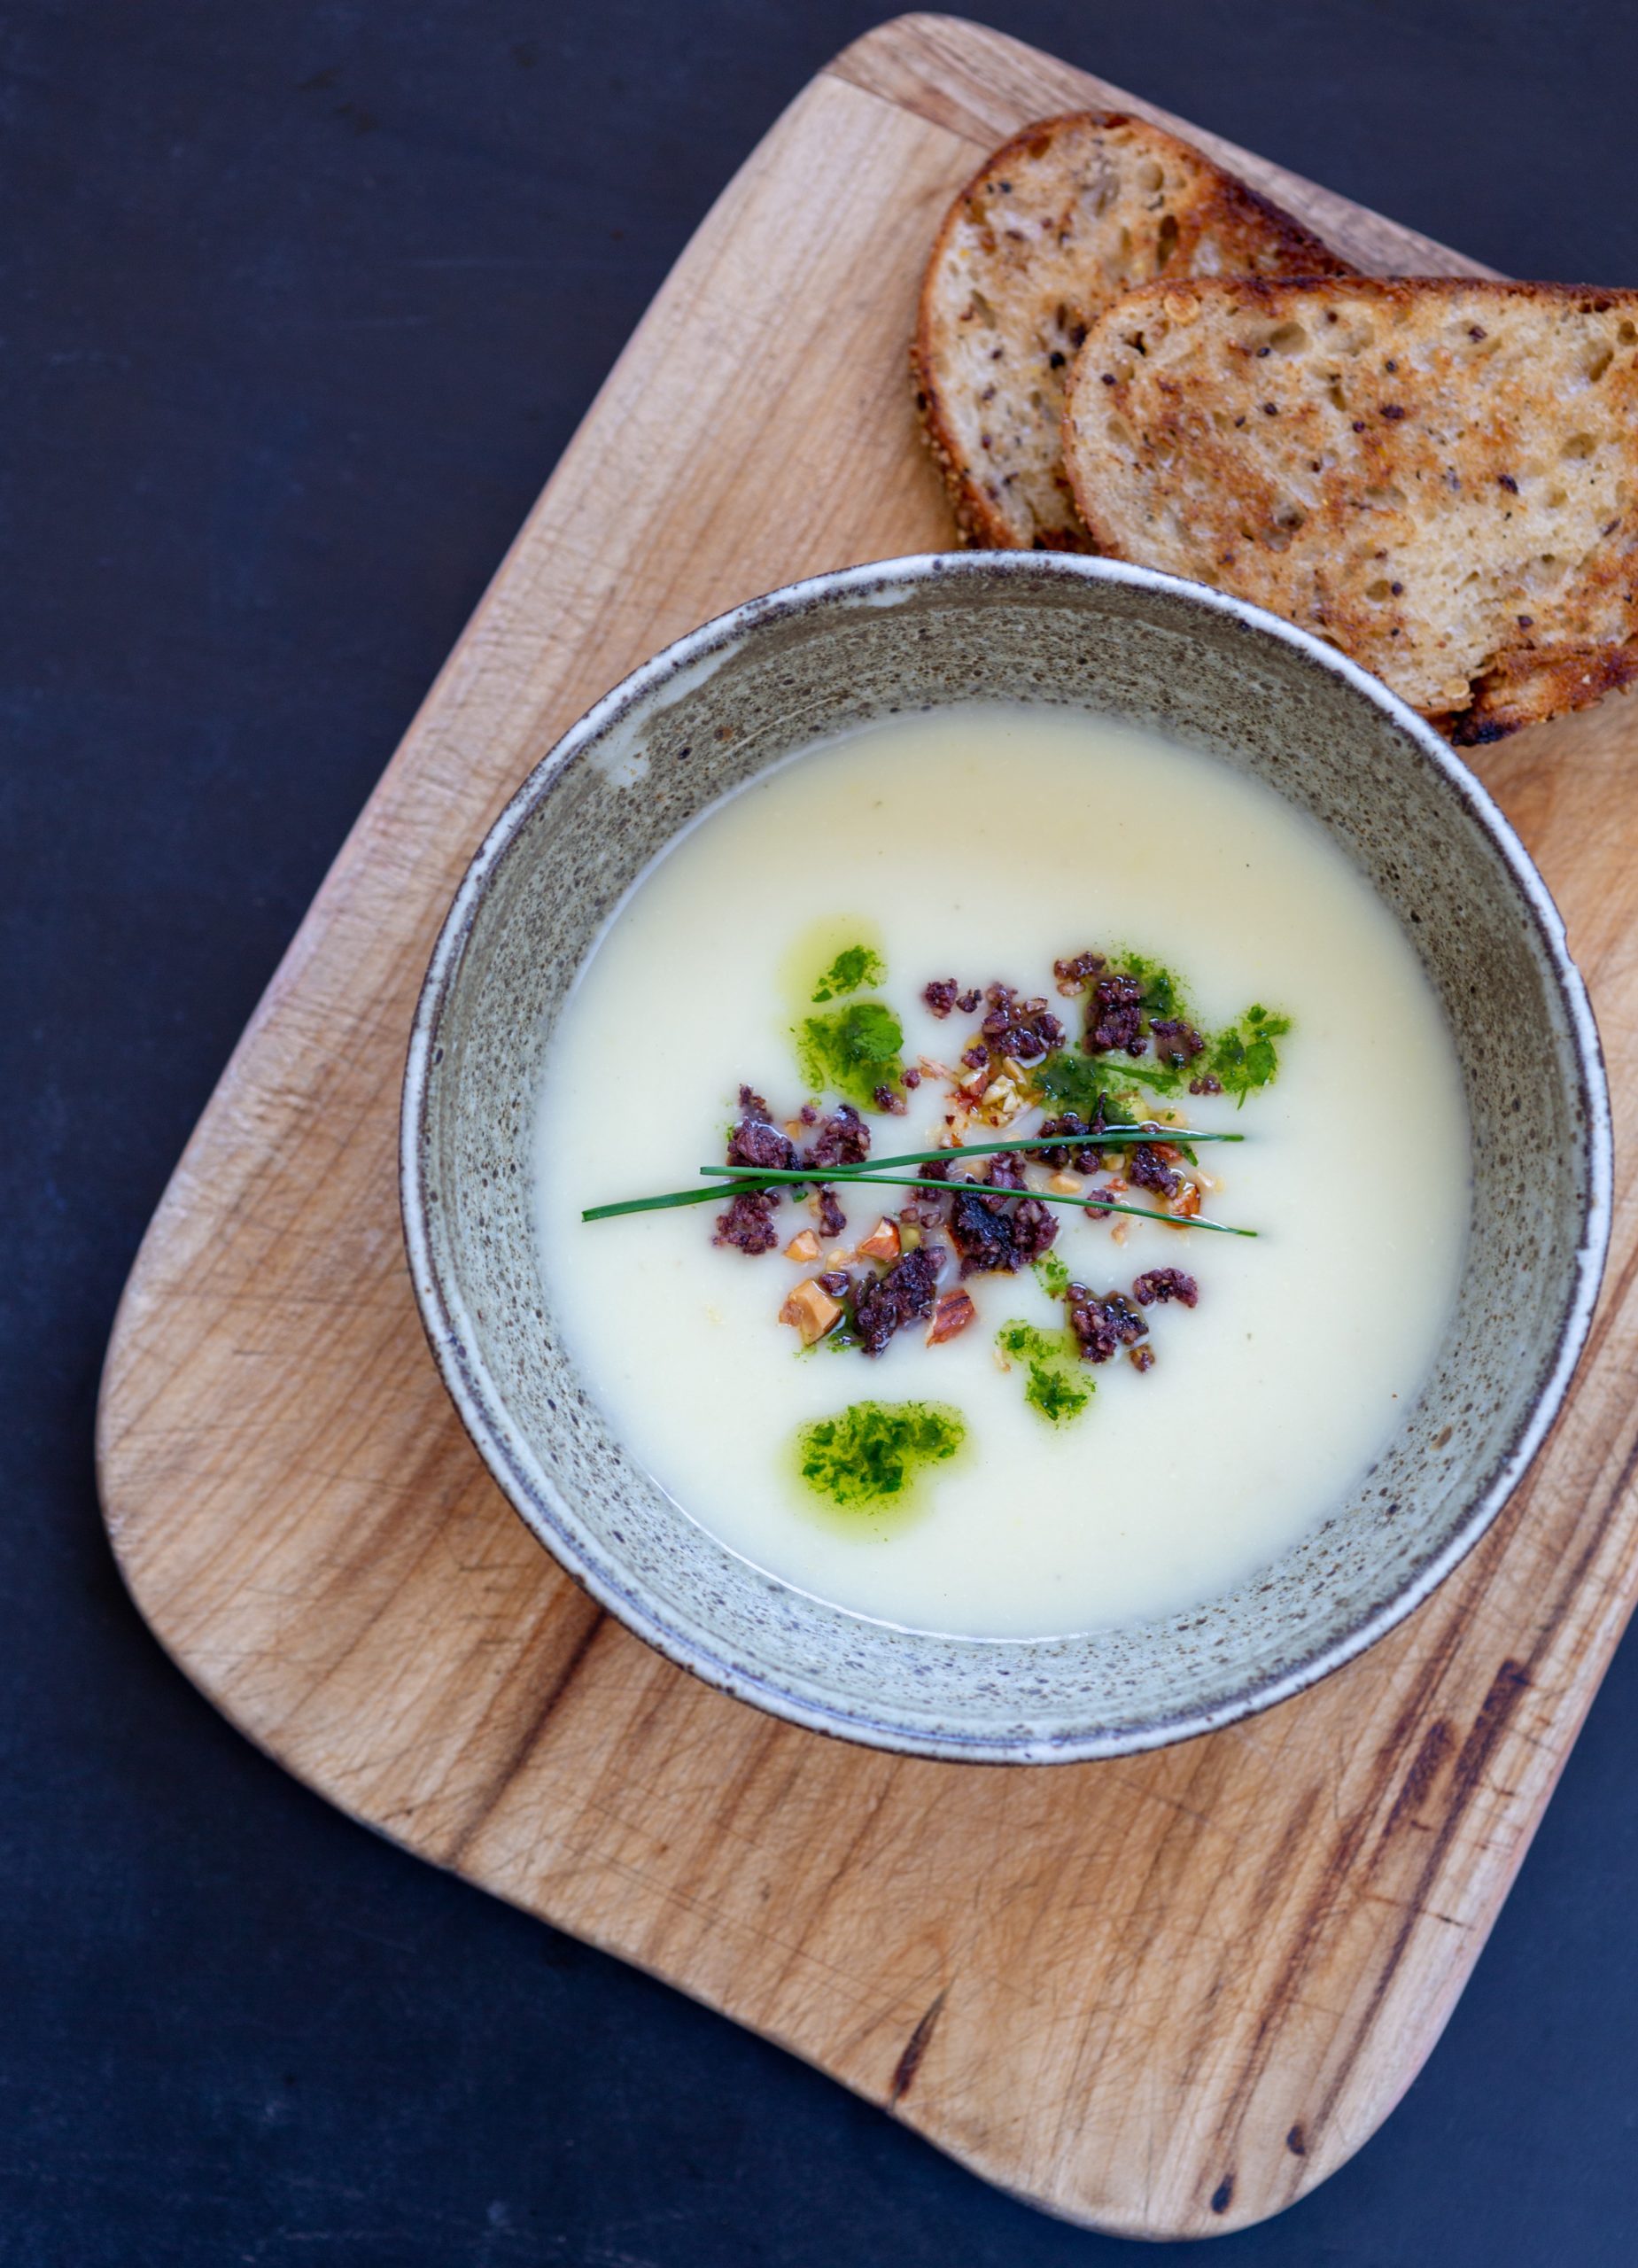 Parsnip soup with Clonakilty Blackpudding